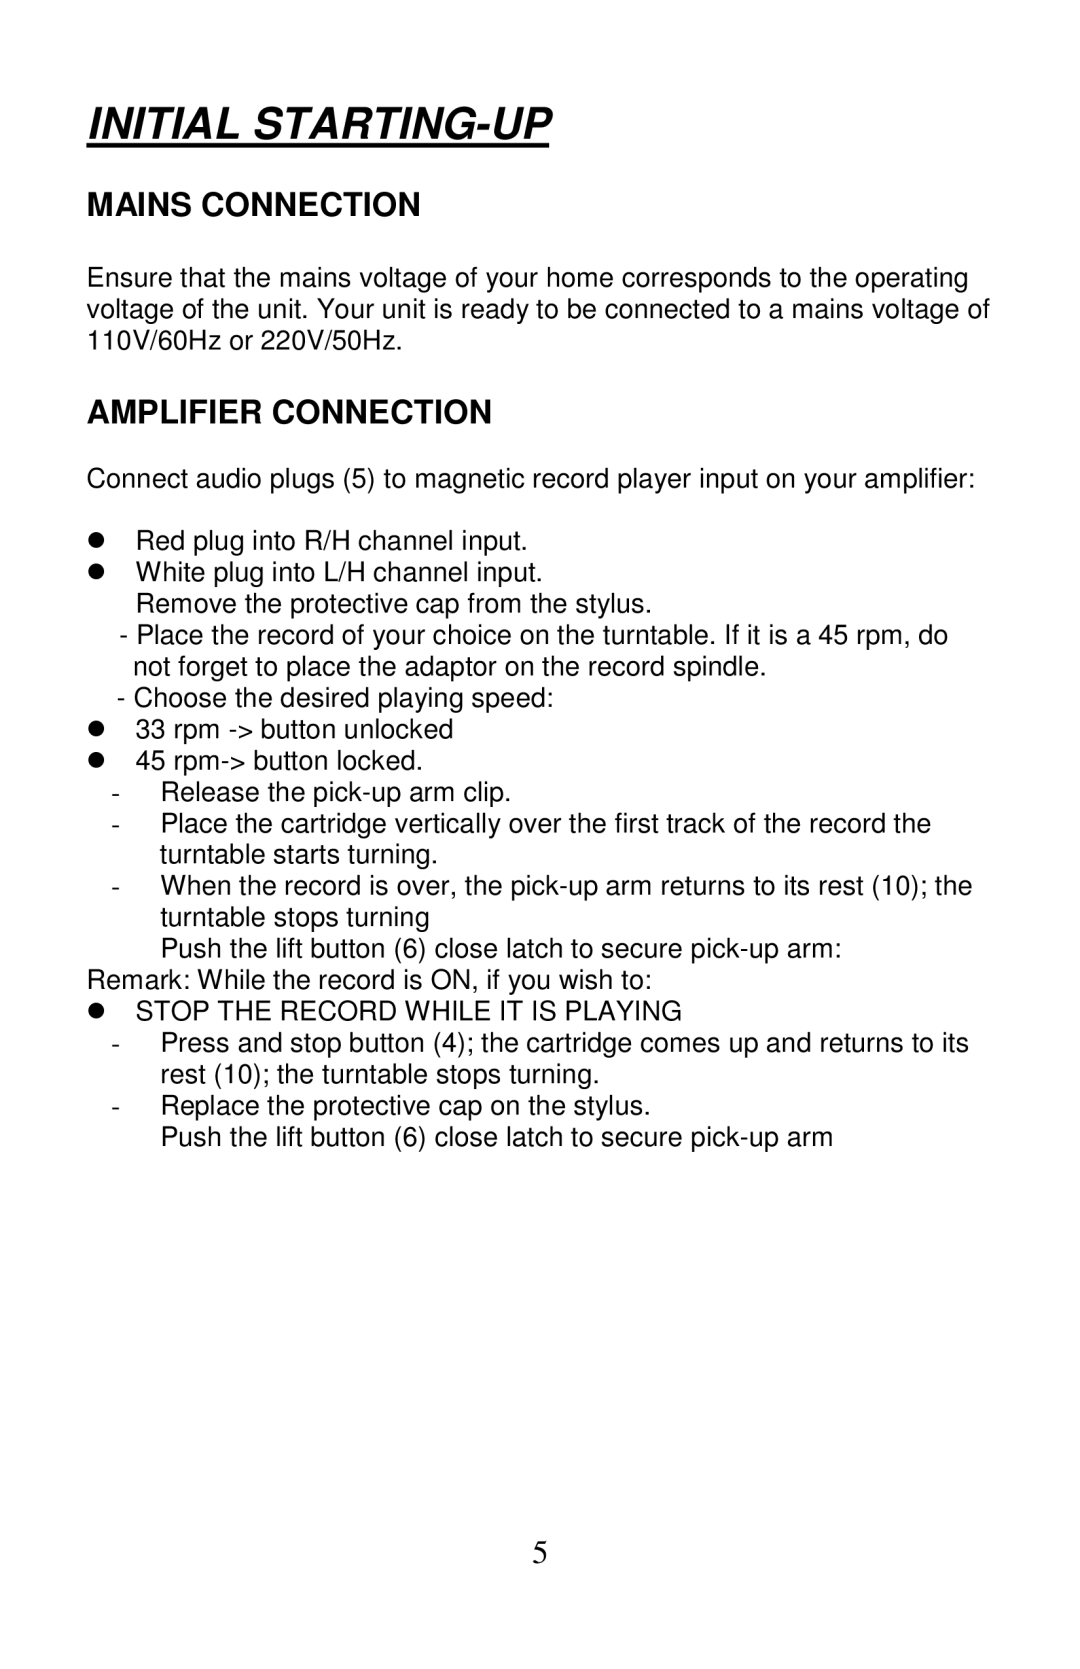 PYLE Audio PLTTB3U manual Initial Starting-Up, Mains Connection, Amplifier Connection 